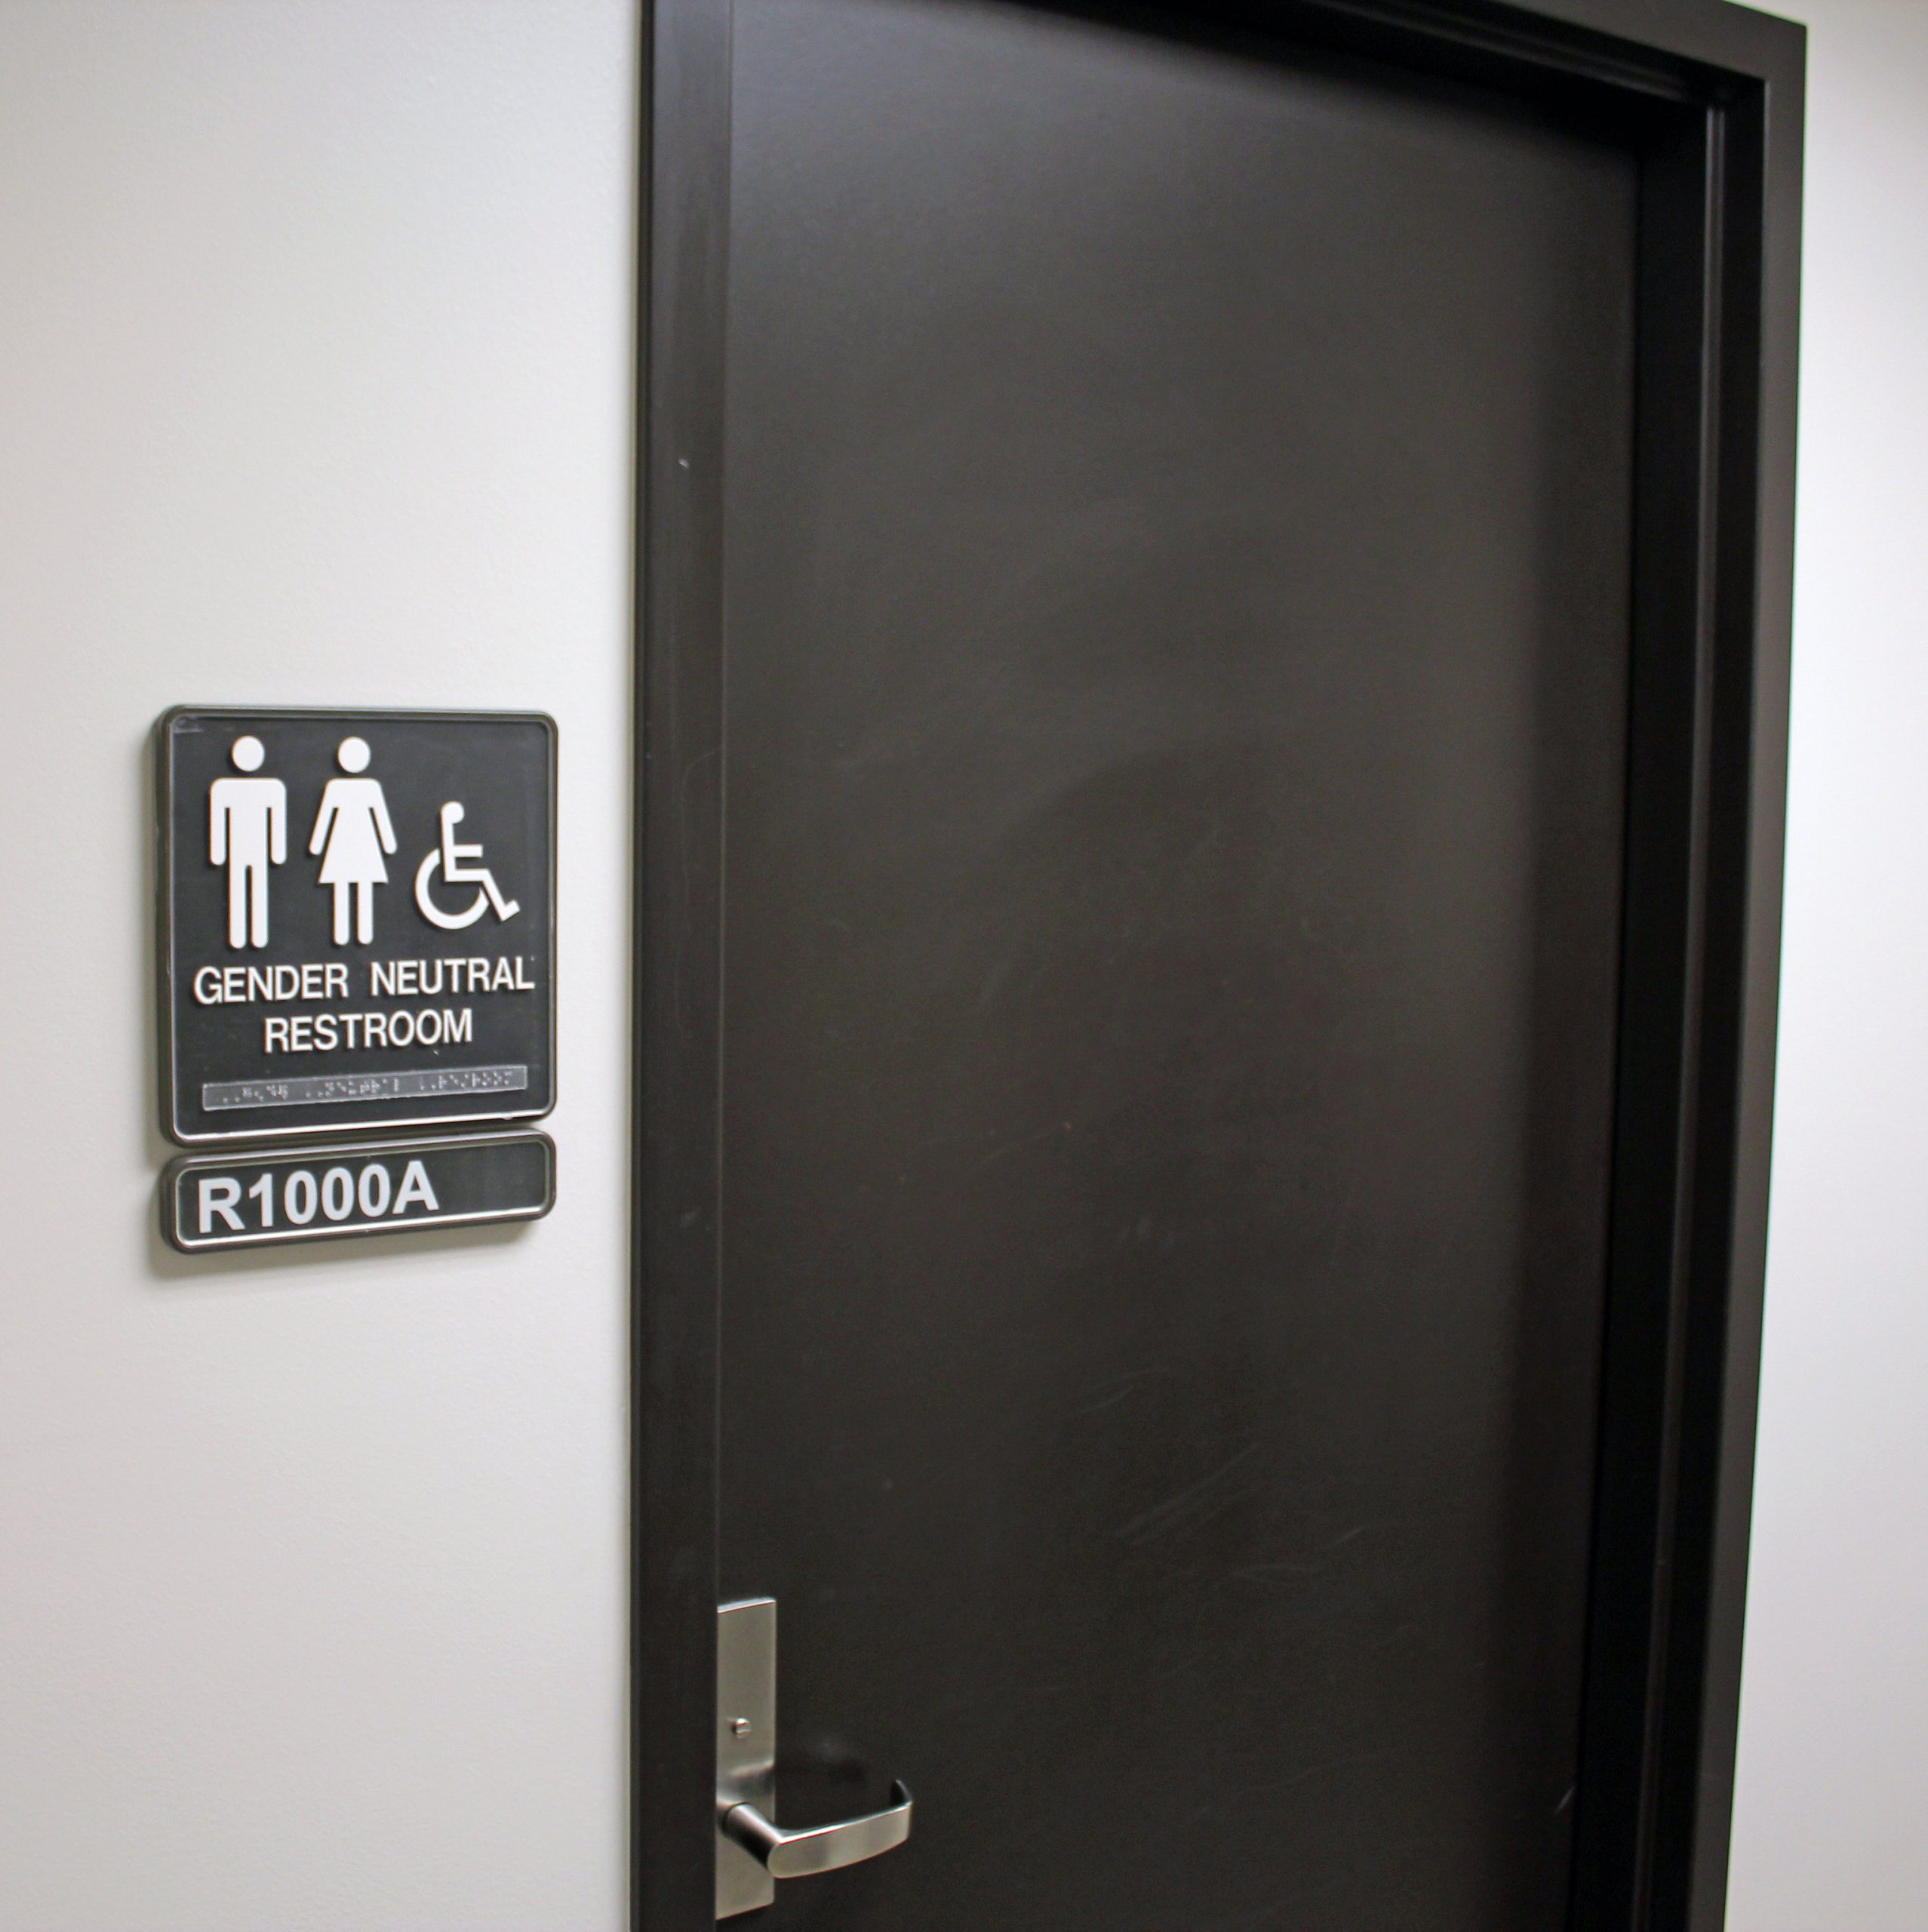 A sign next to a door that says "GENDER NEUTRAL RESTROOM."